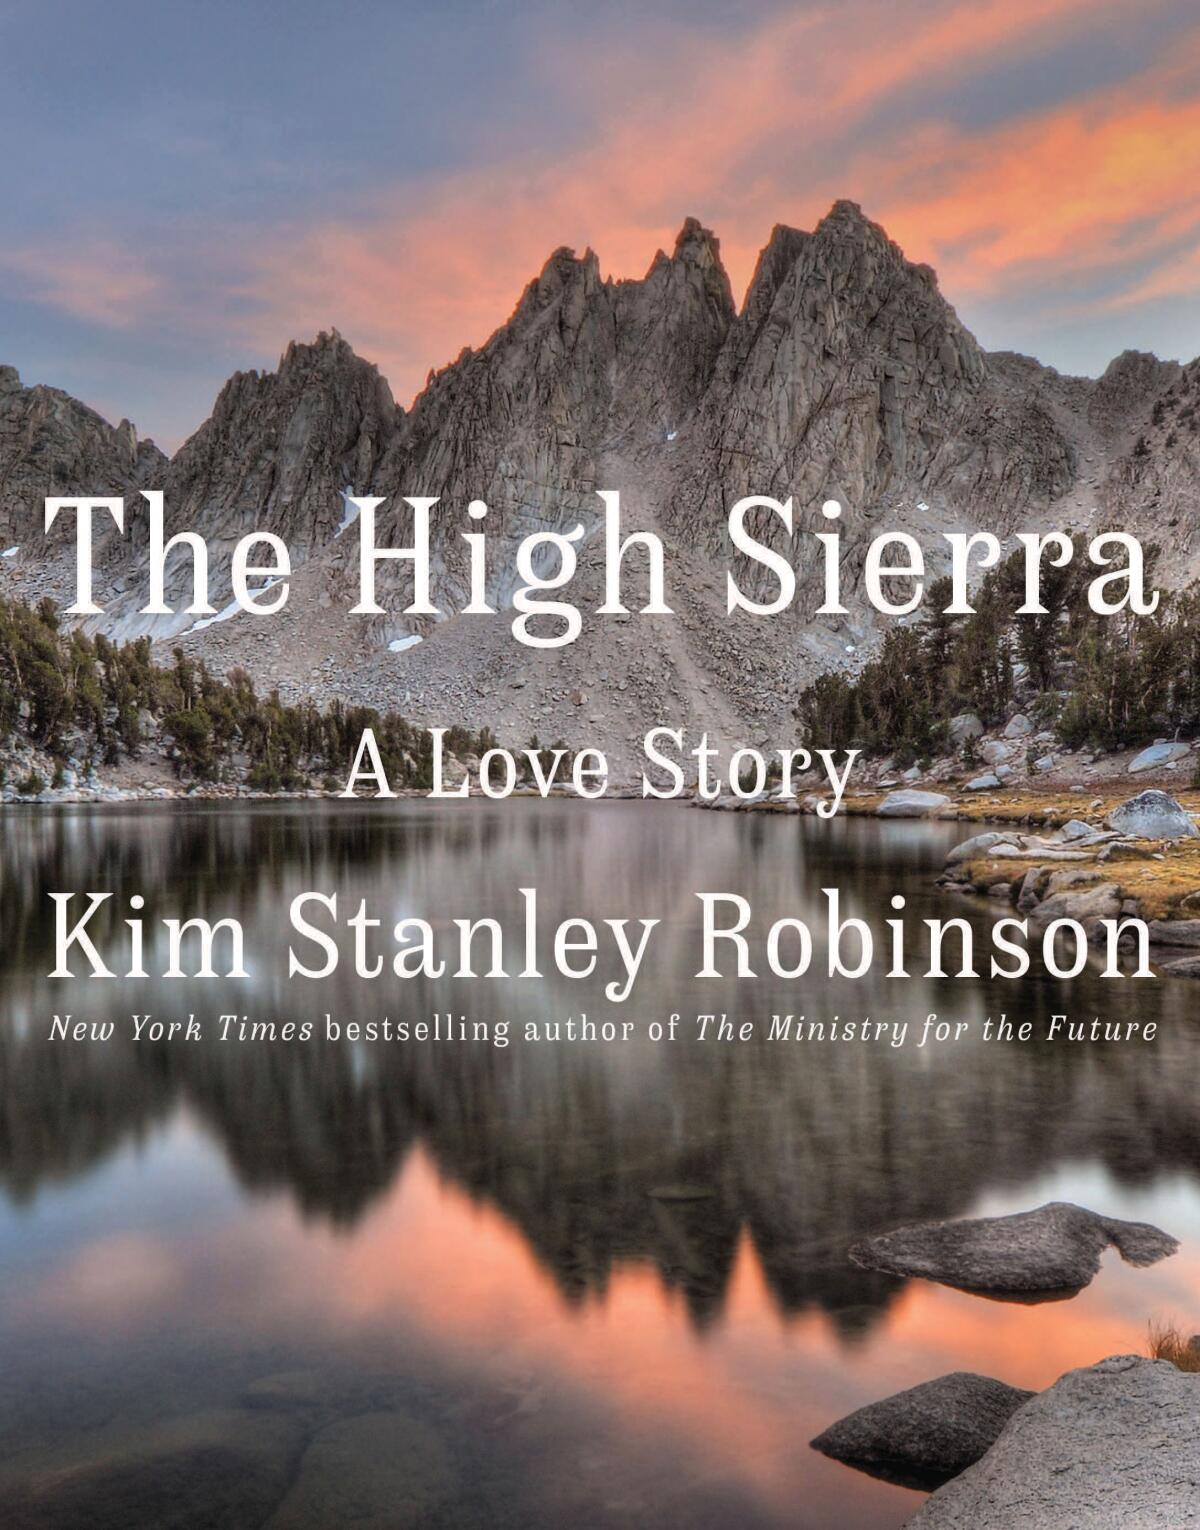 Book cover of "The High Sierra," showing a sawtooth ridge beneath a pastel sky.